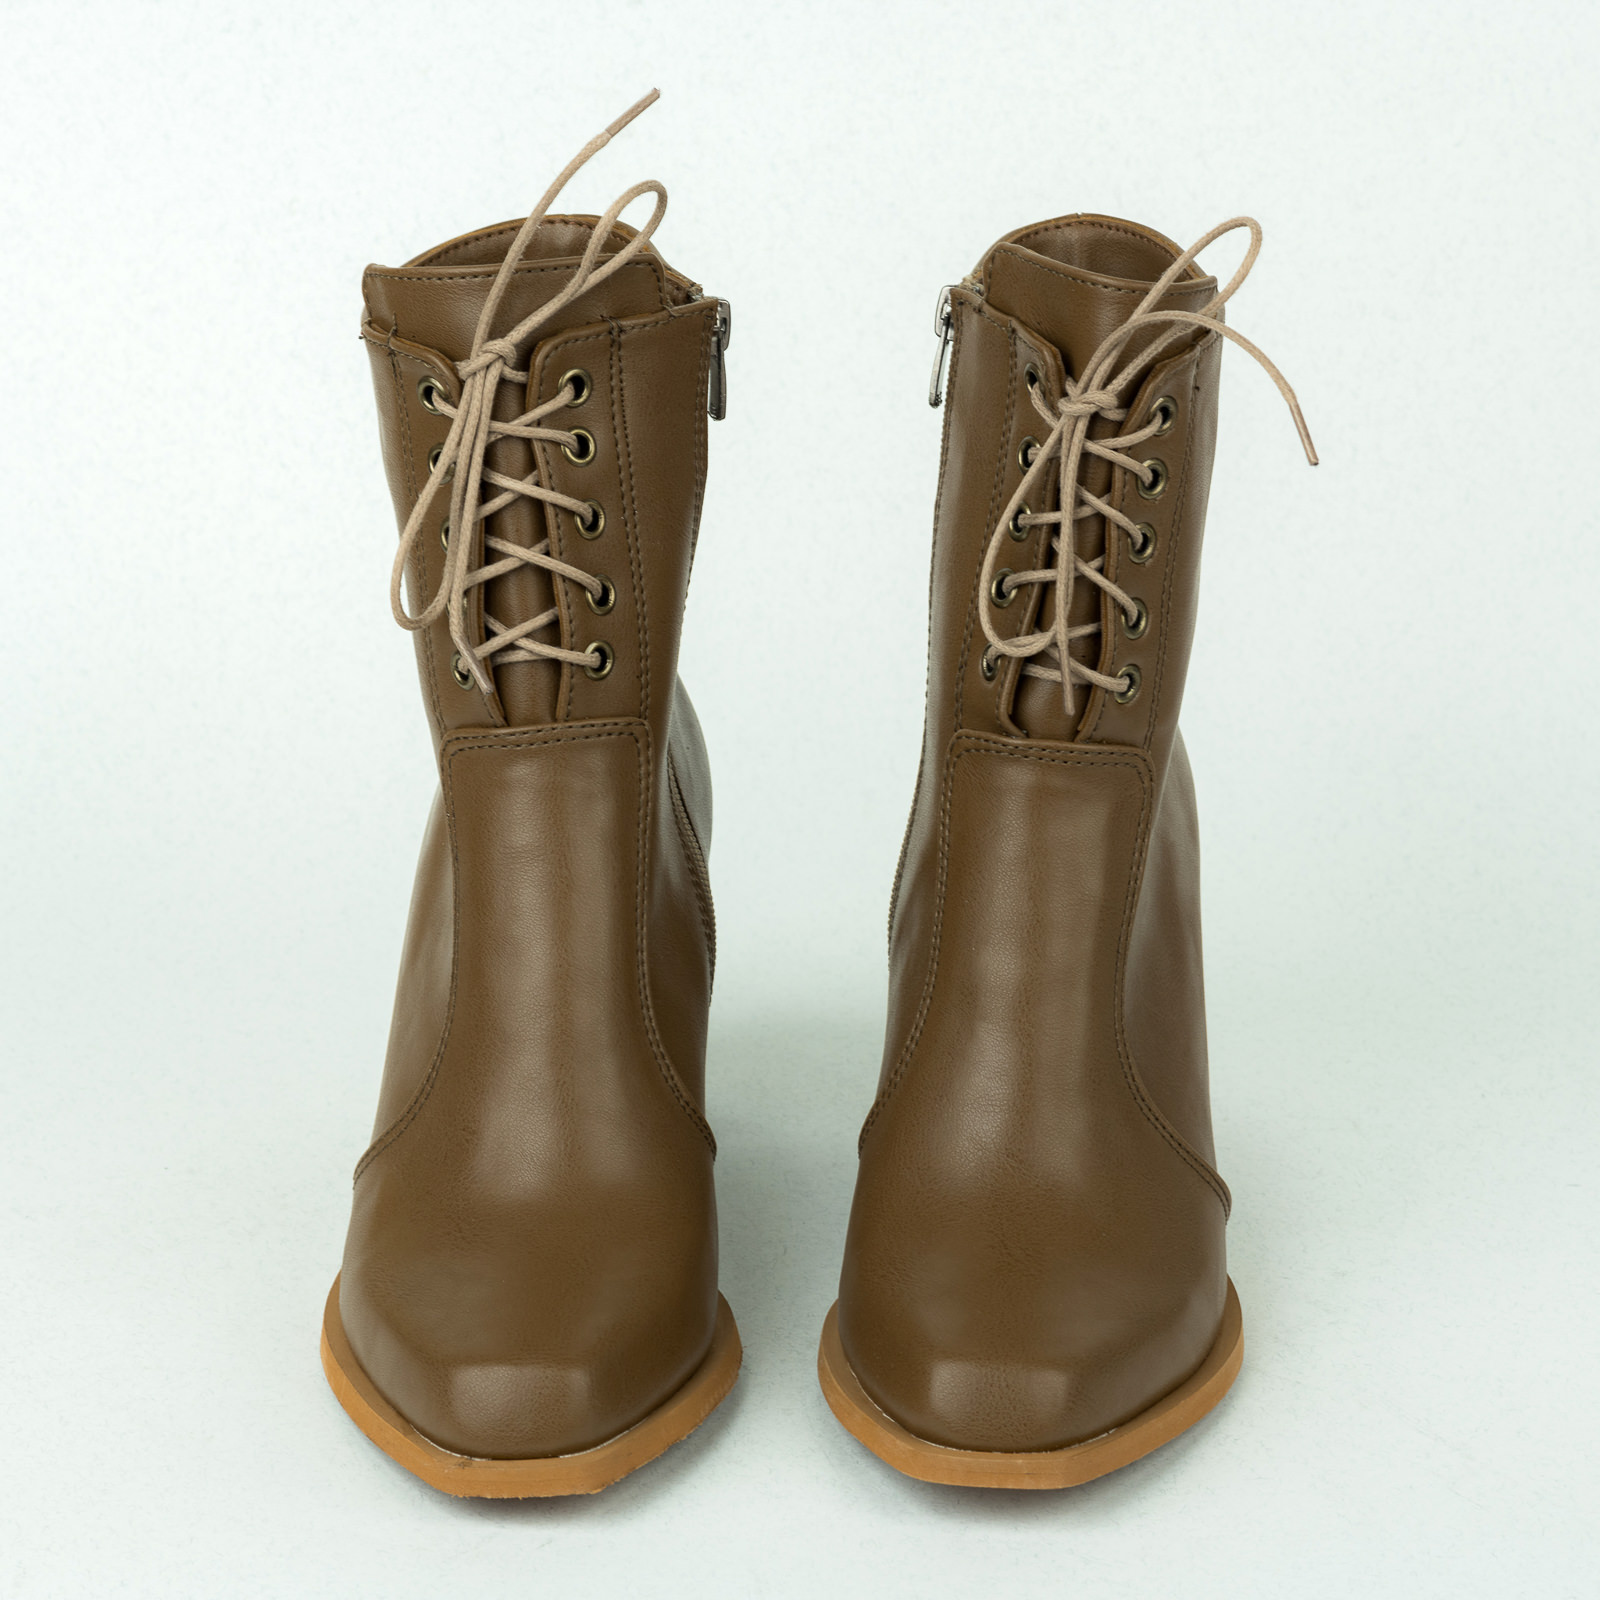 Women ankle boots B359 - BROWN